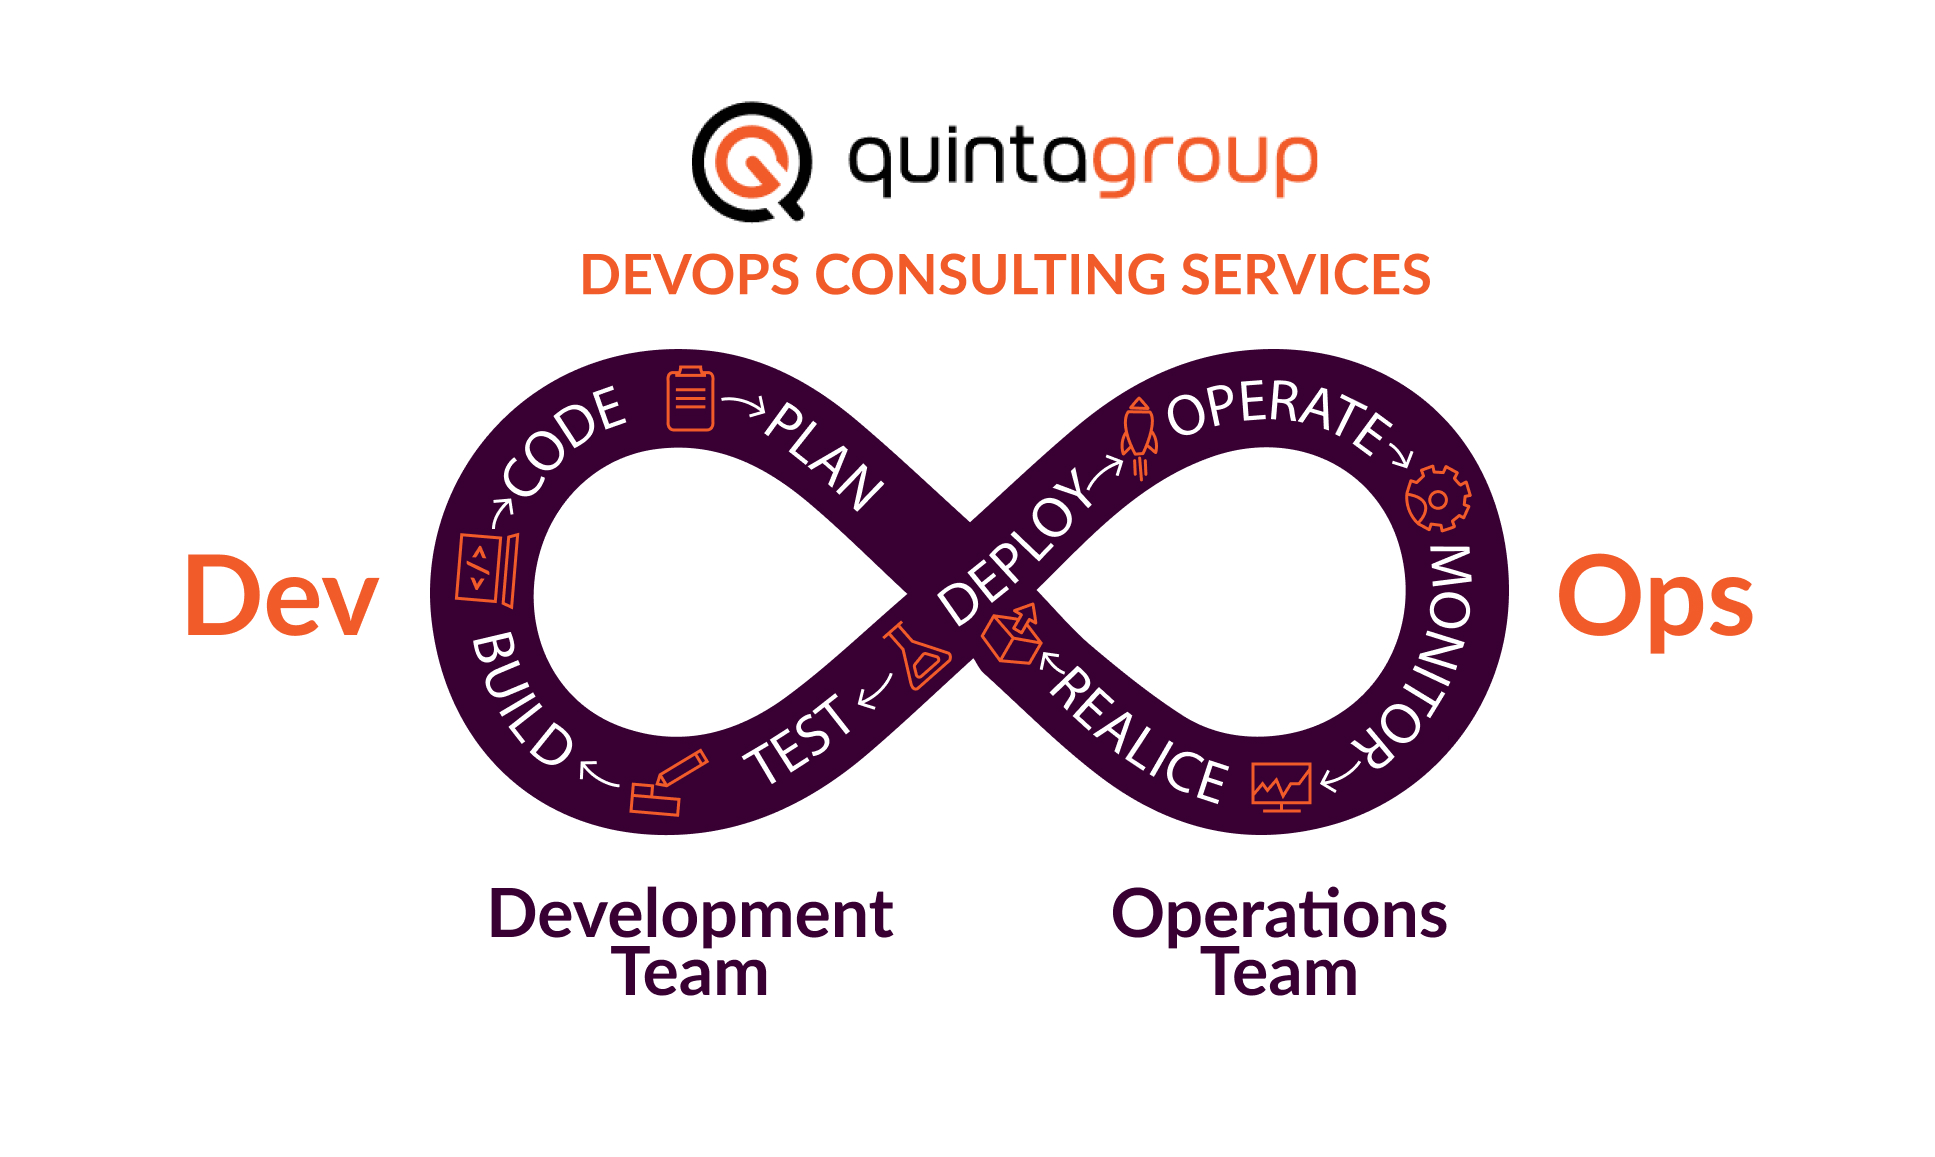 DevOps Consulting Services